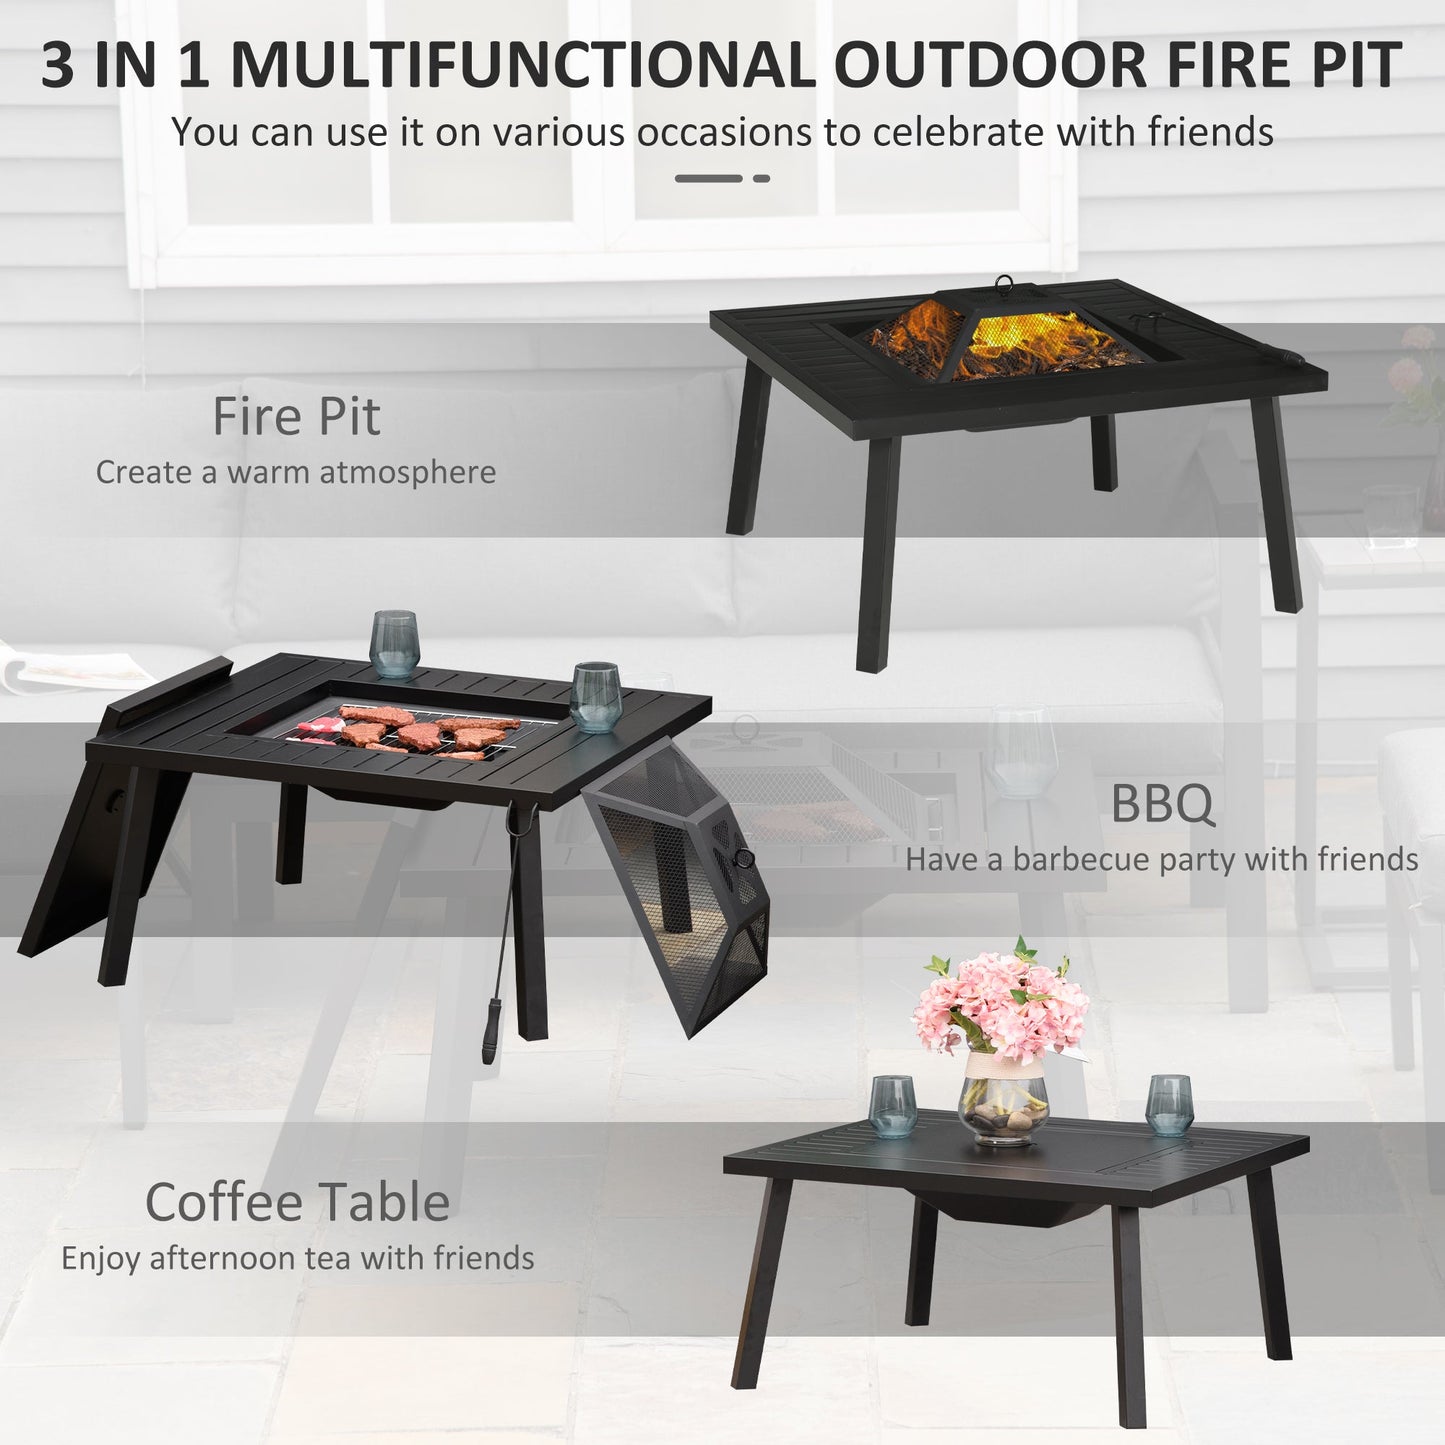 Outdoor and Garden-34" Outdoor Fire Pit, Wood Burning Fire pit Table, Barbecue Grill with Spark Screen, Poker, and Rain Cover - Outdoor Style Company